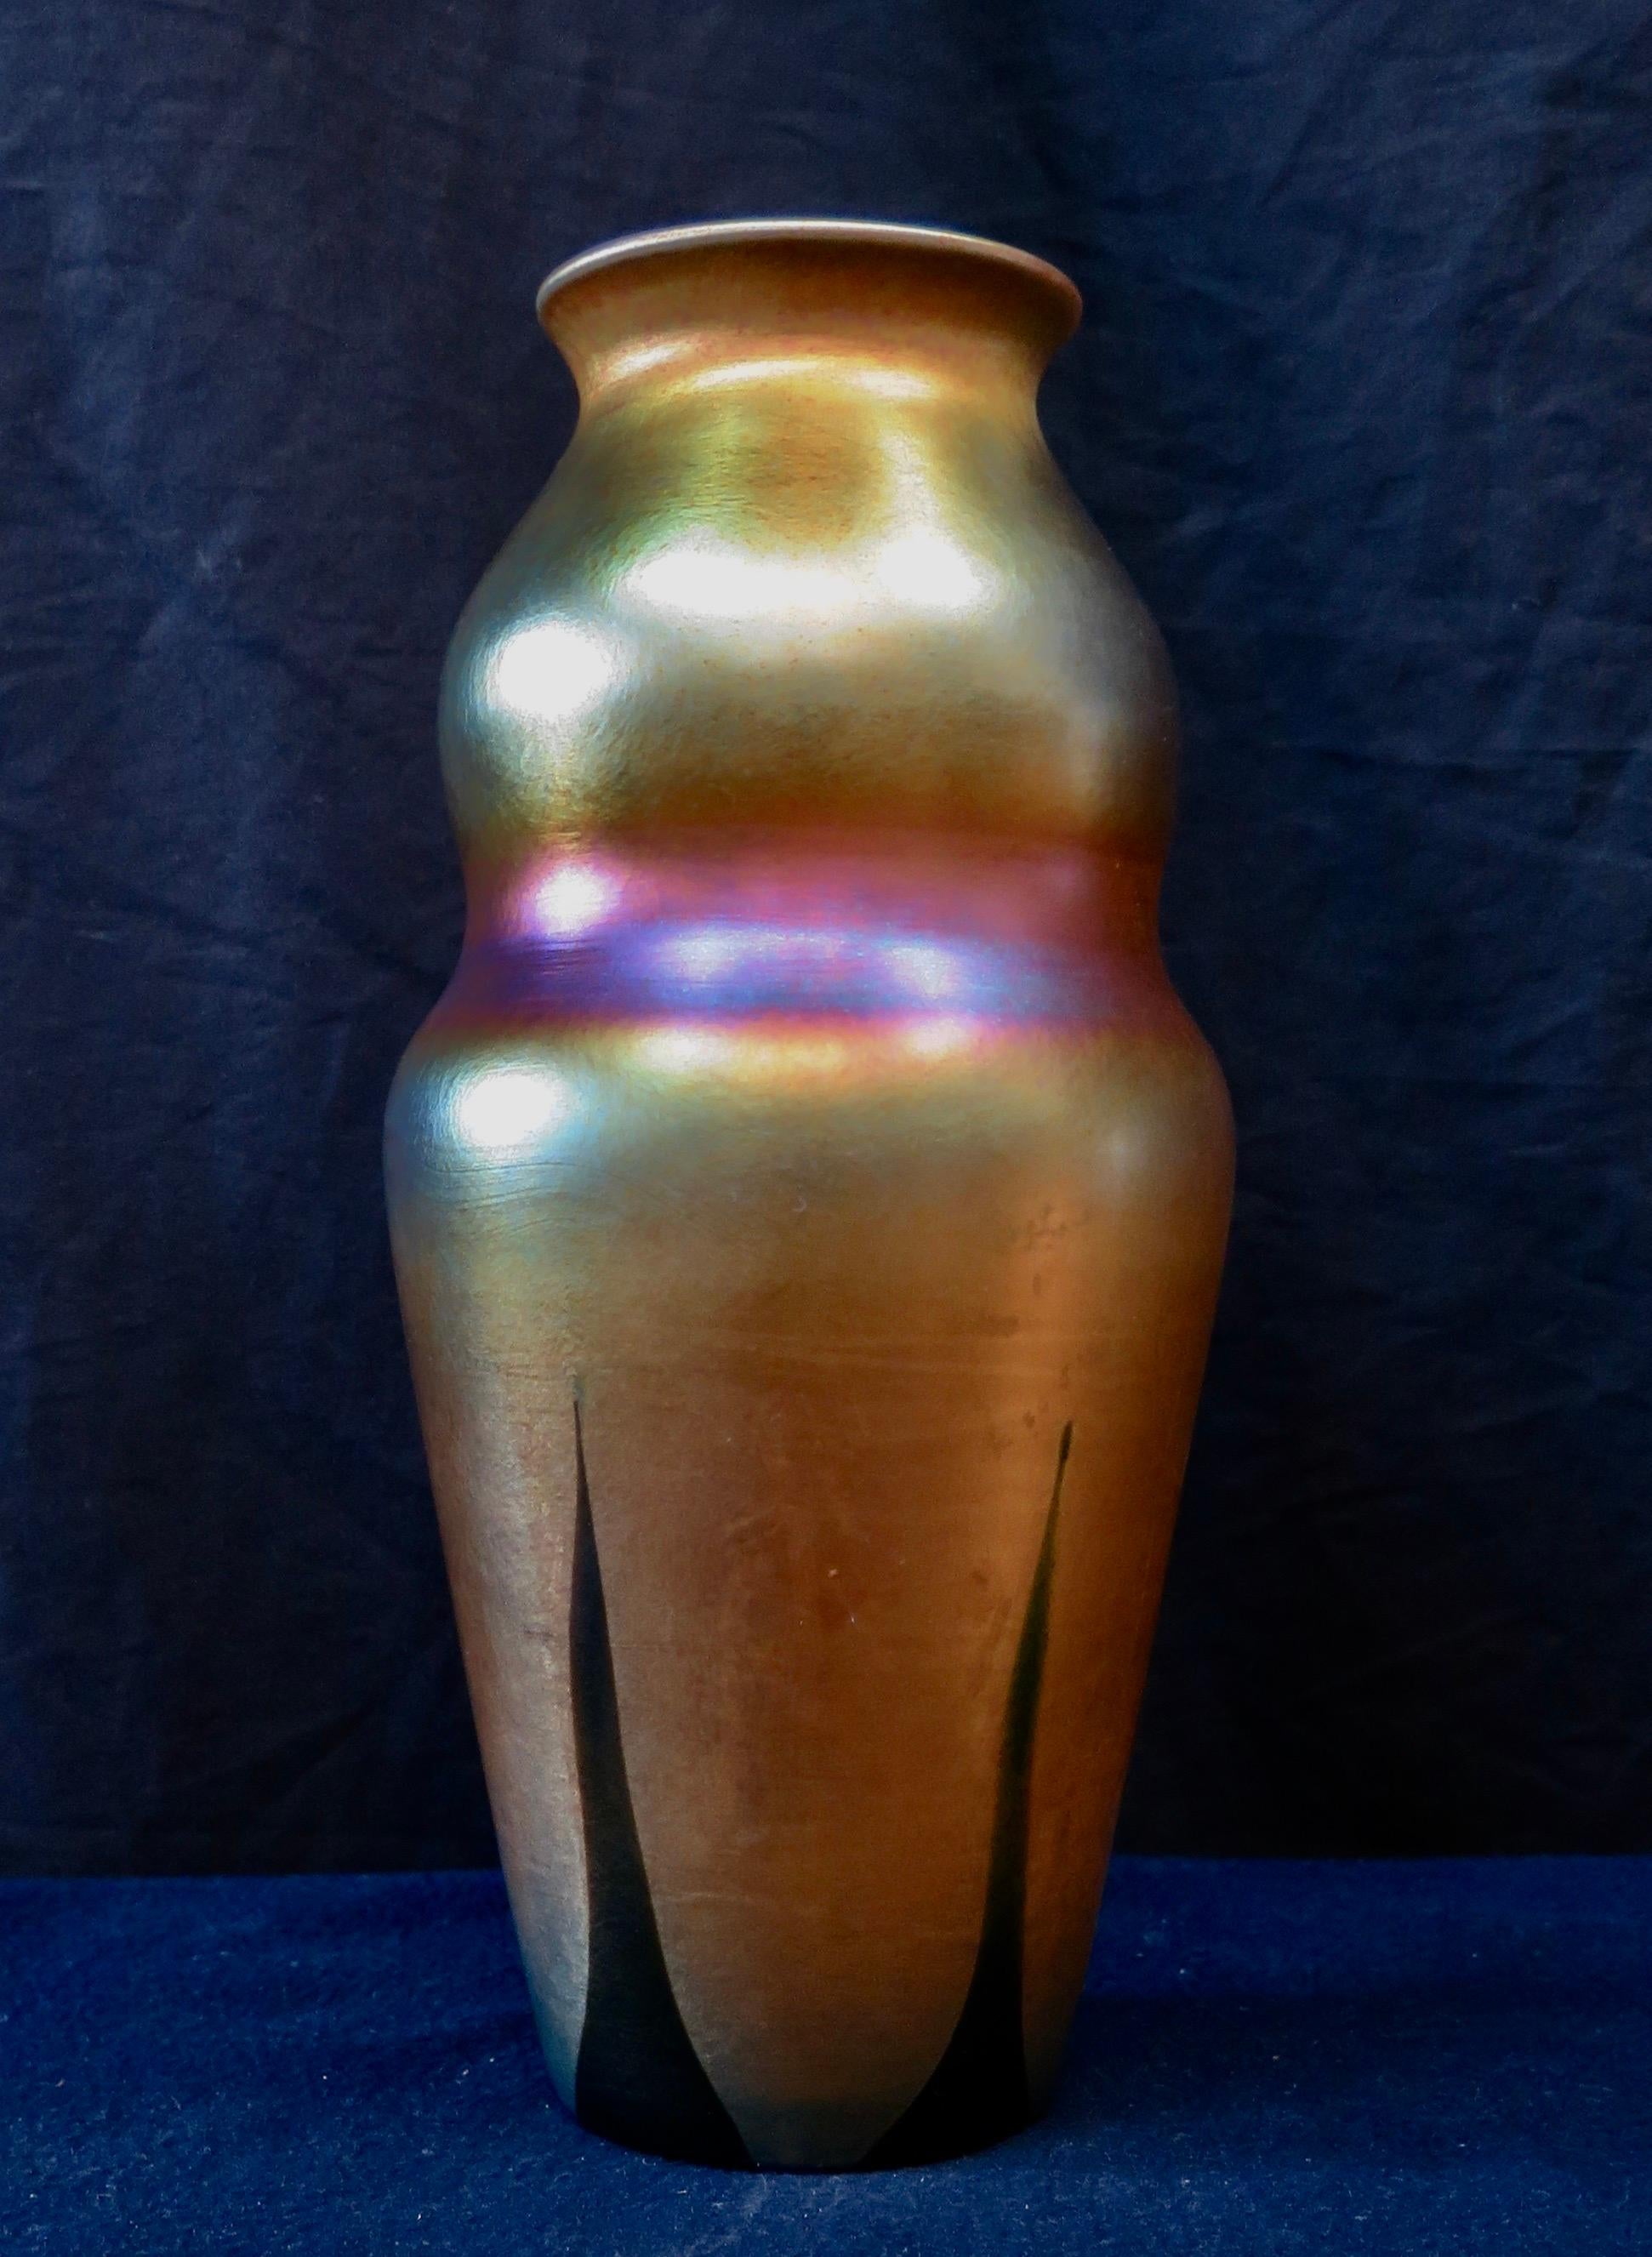 This stunning Tiffany Studios gold vase is decorated & dates from the early 1900’s. The hand blown vase is accented with five elongated green feather “tips” from “feathers” that originate on the undersurface of the vase. Looking at this